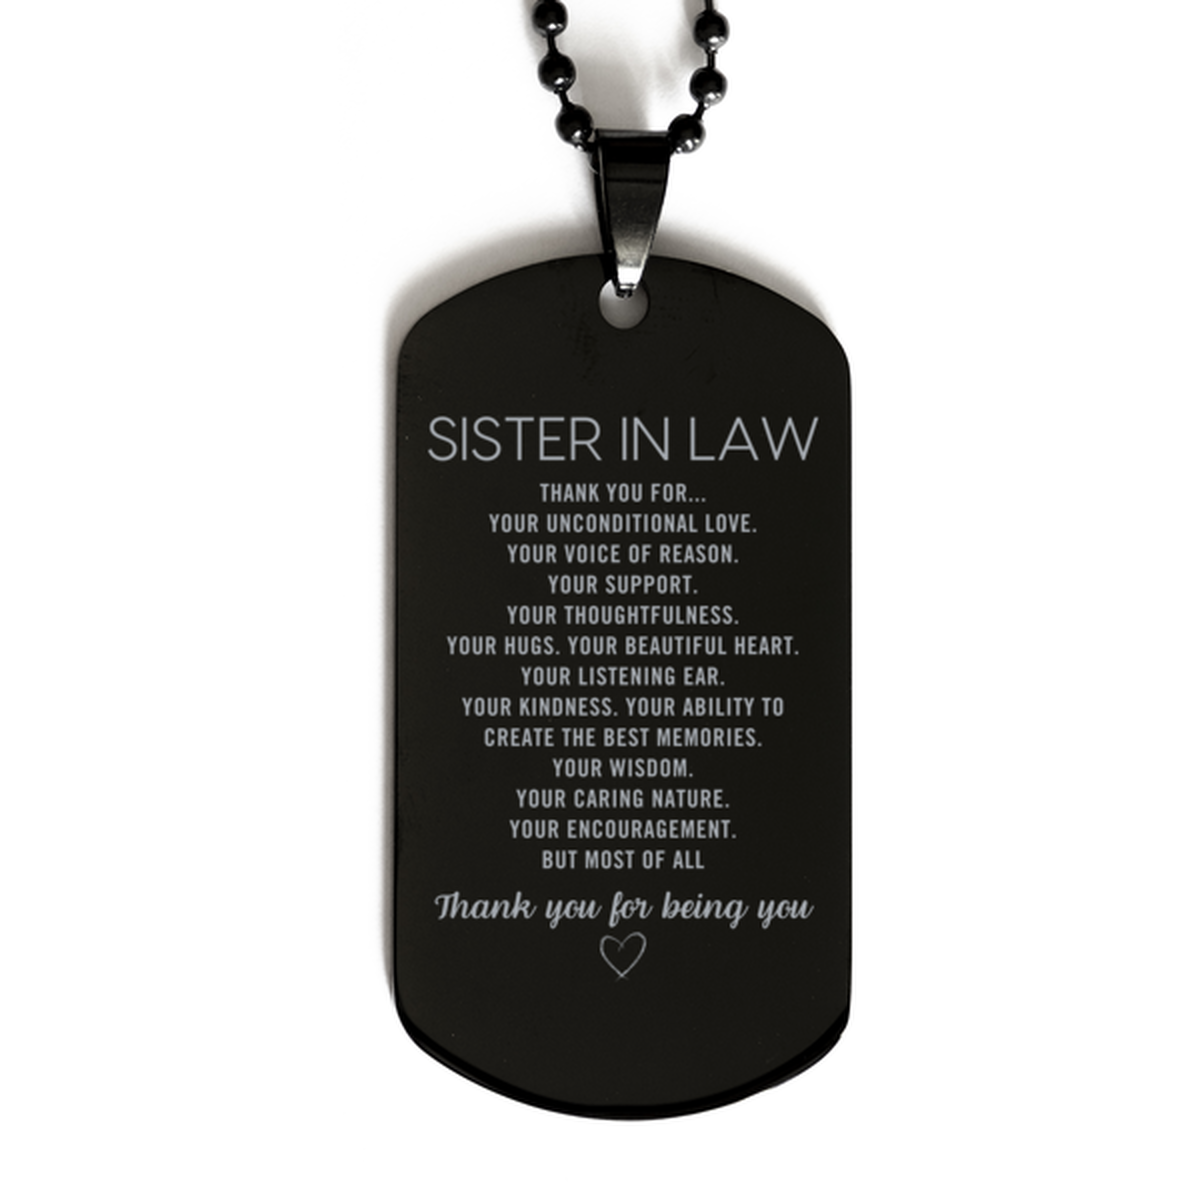 Sister In Law Black Dog Tag Custom, Engraved Gifts For Sister In Law Christmas Graduation Birthday Gifts for Men Women Sister In Law Thank you for Your unconditional love